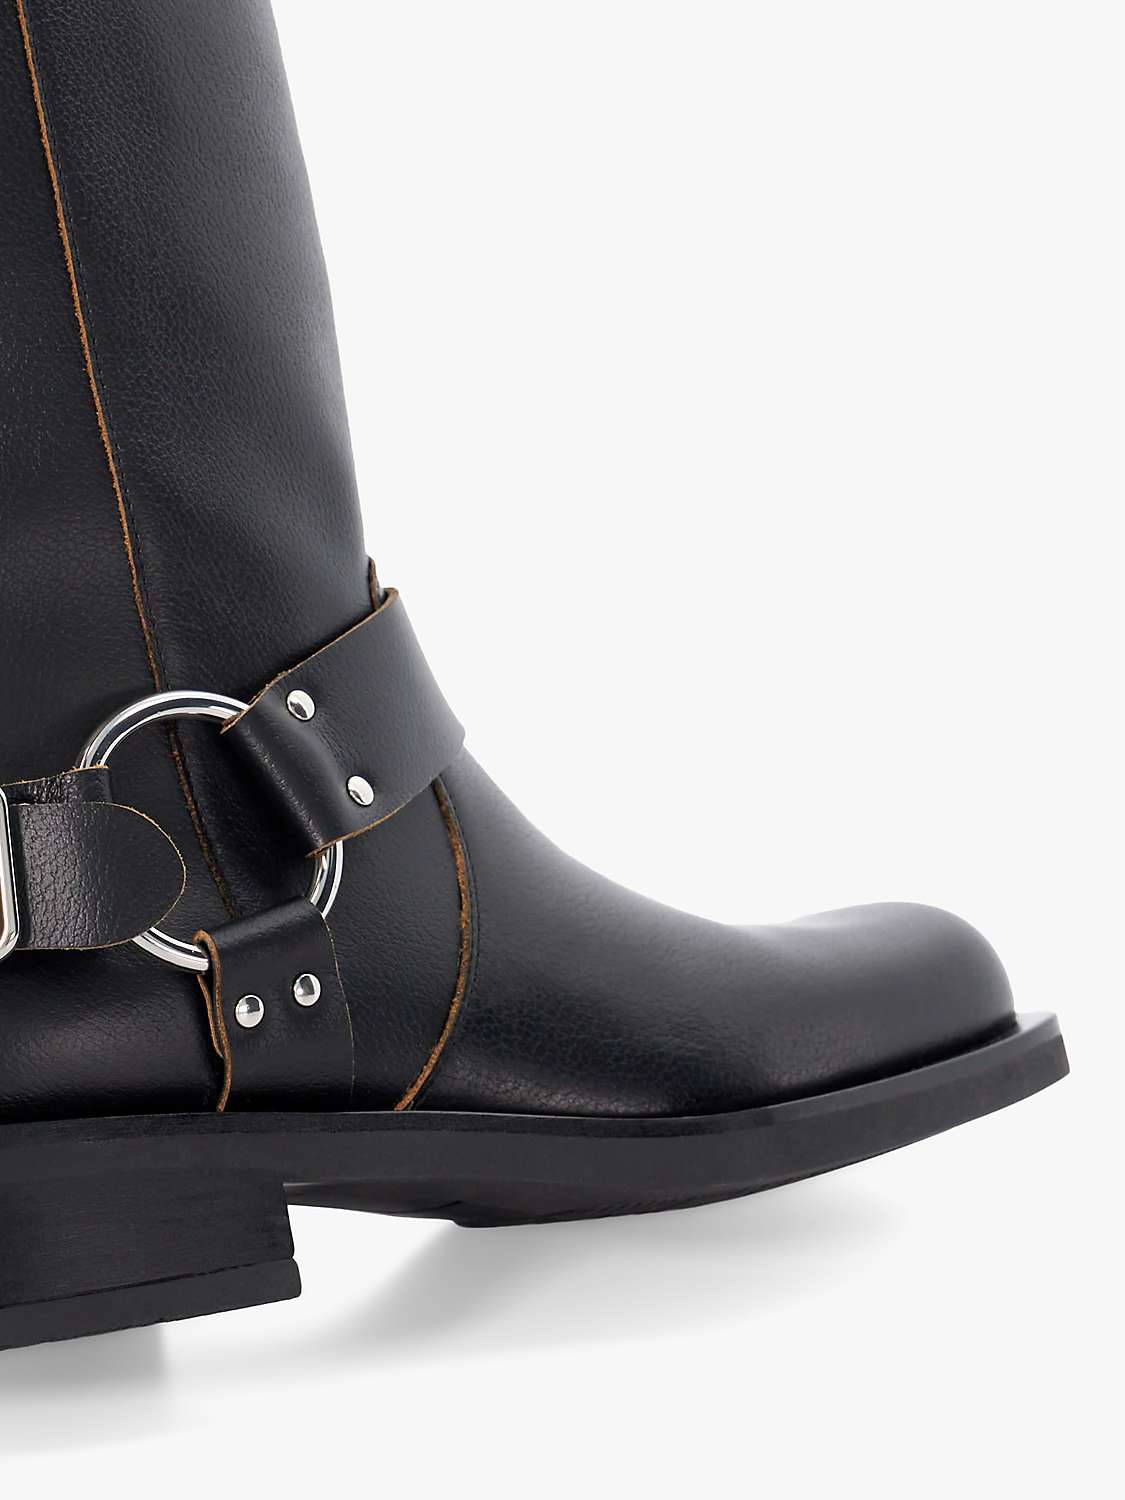 Dune Totoe Leather Buckle Detail Ankle Boots, Black at John Lewis & Partners